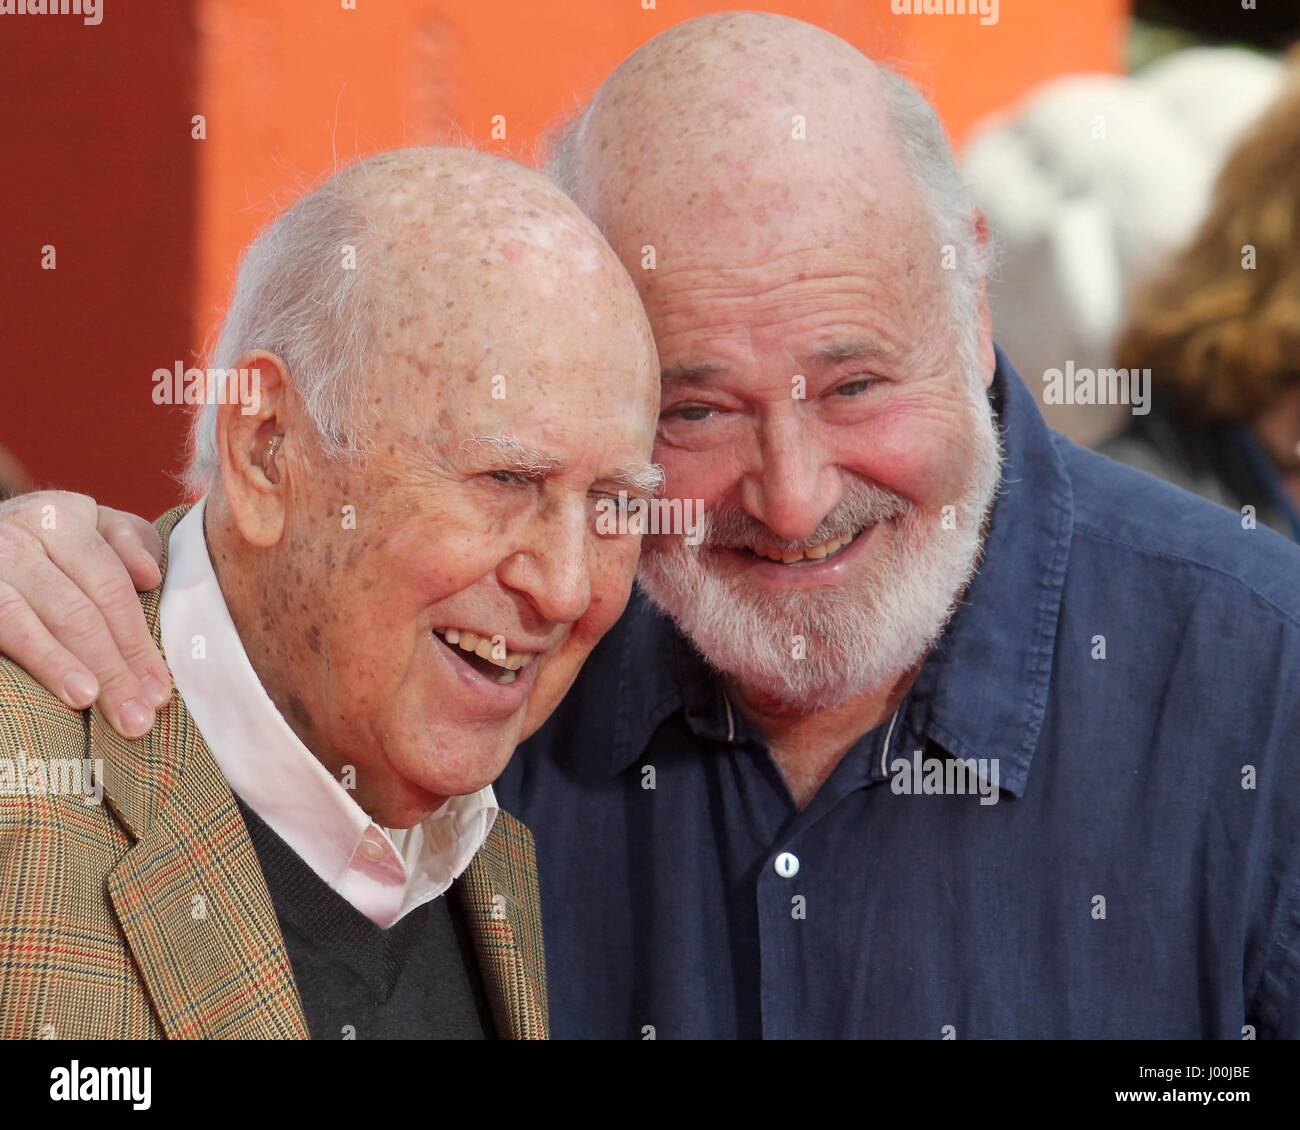 Los Angeles, CA, USA. 7th Apr, 2017. Carl Reiner, Rob Reiner at a public appearance for Carl Reiner and Rob Reiner Hand- and Footprint Ceremony, TCL Chinese Theatre (formerly Grauman's), Los Angeles, CA April 7, 2017. Credit: Priscilla Grant/Everett Collection/Alamy Live News Stock Photo